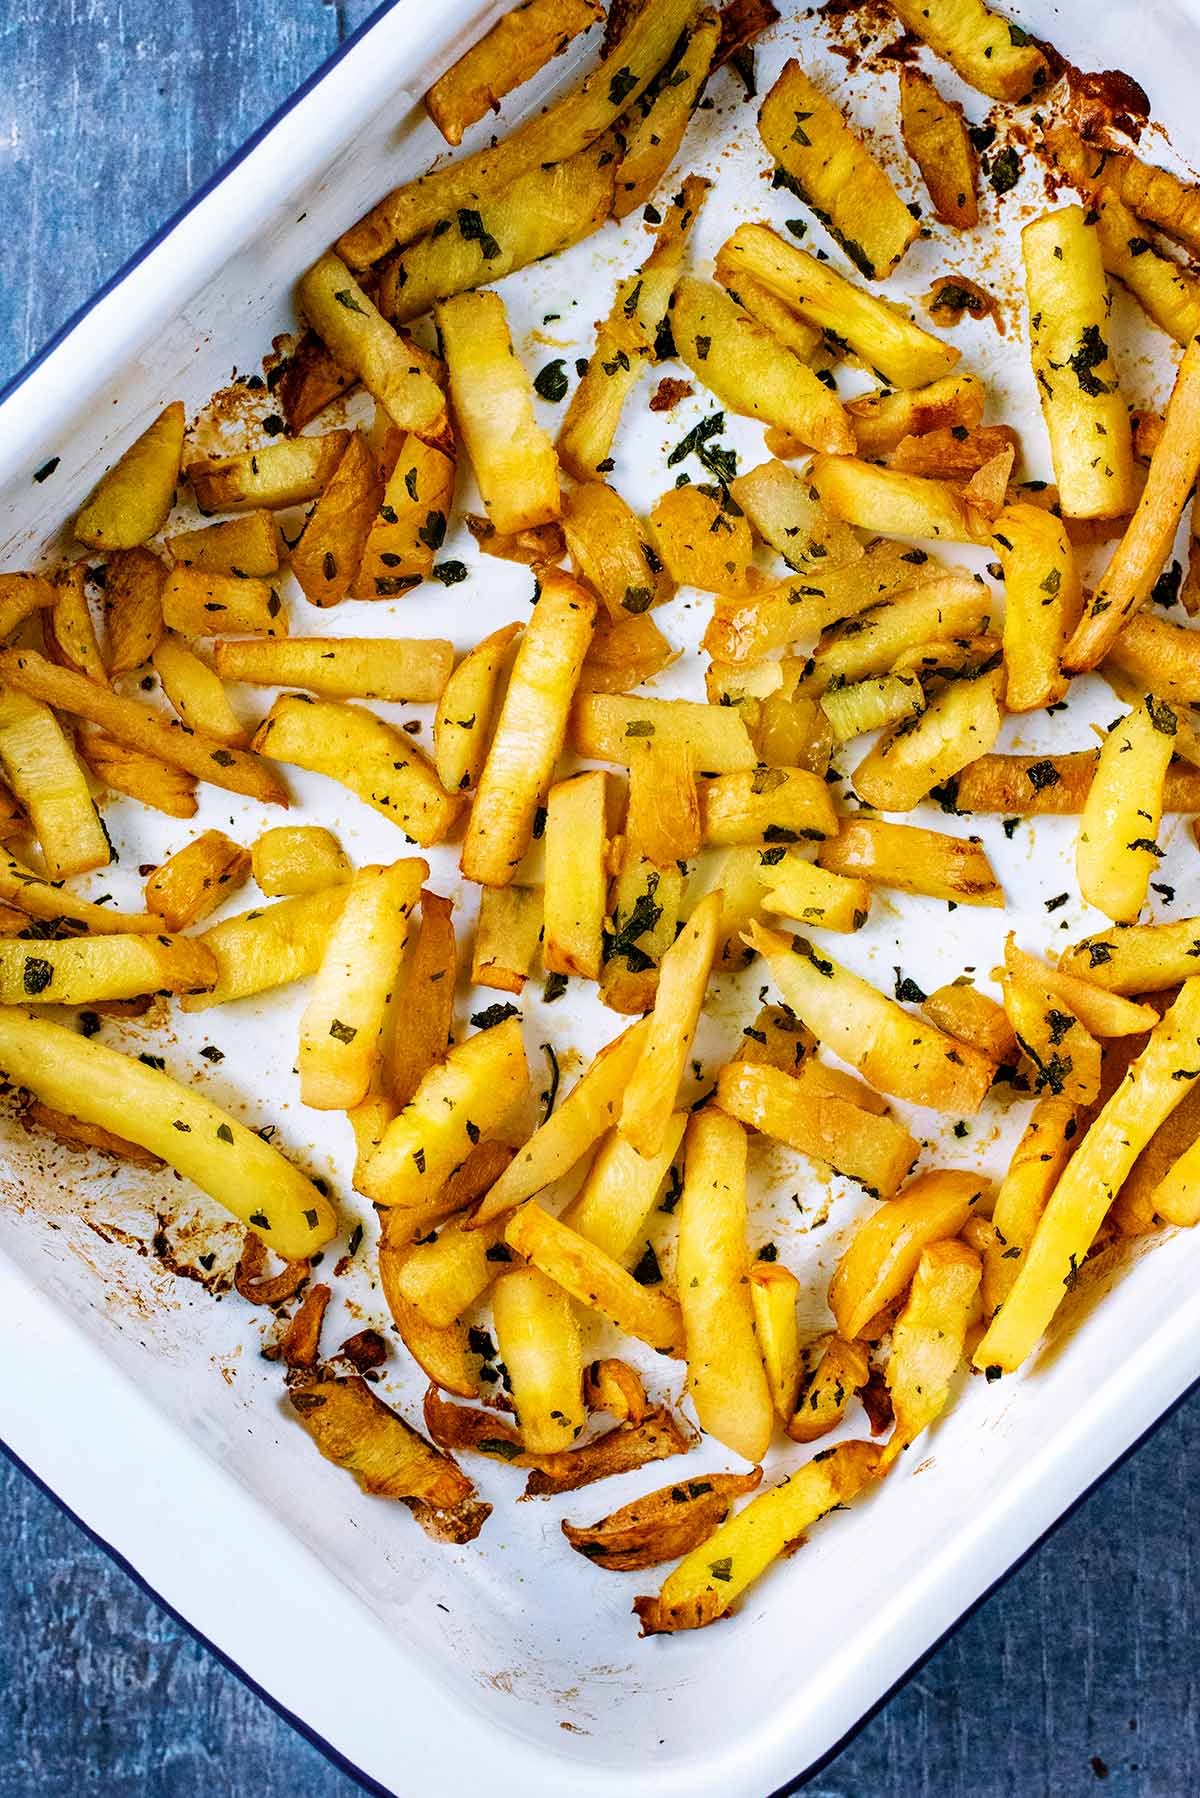 A baking tray containing cooked parsnip fries.